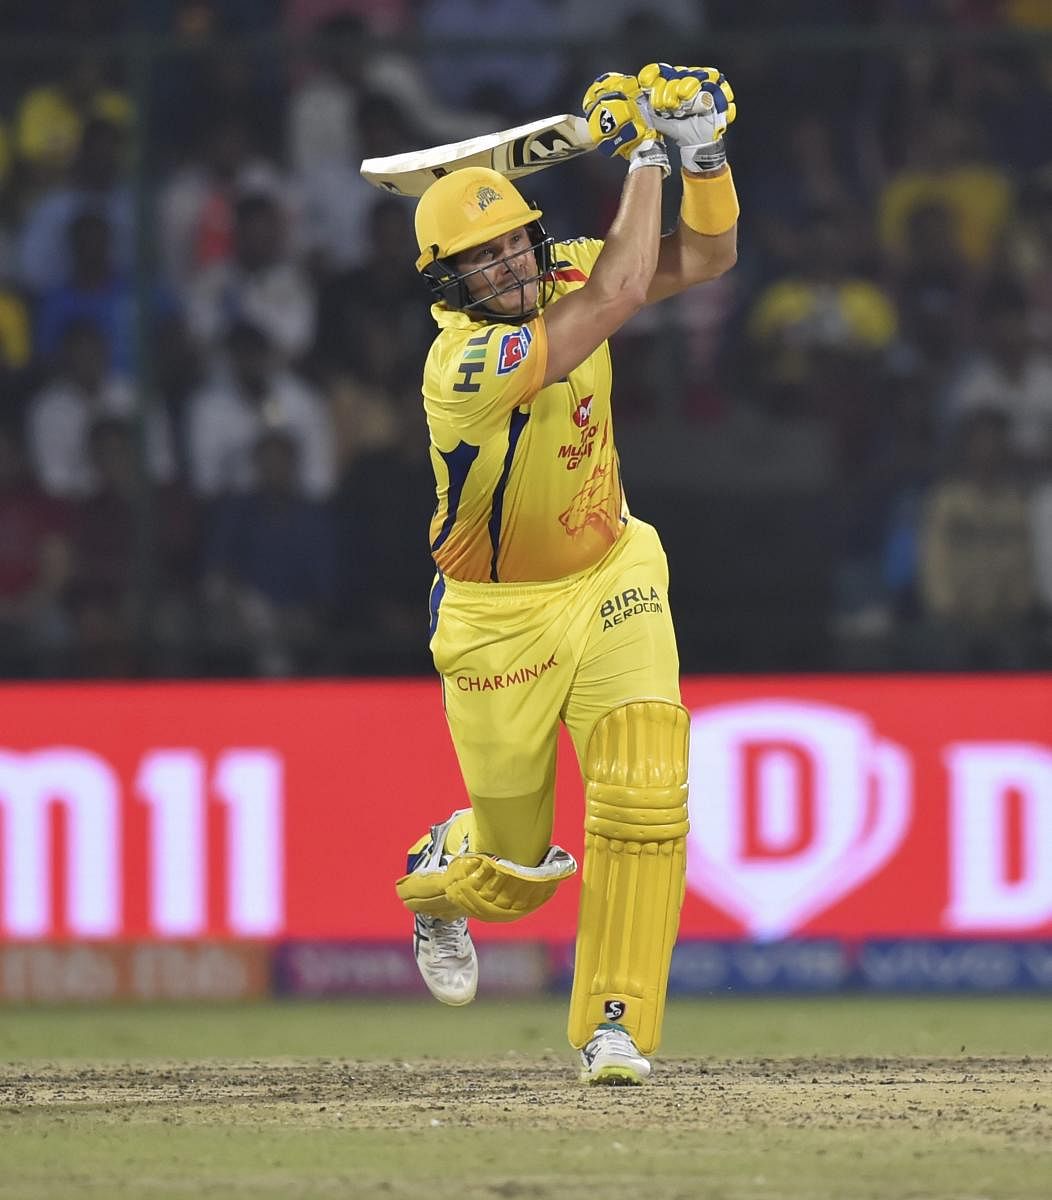 CSK's Shane Watson hits one to the boundary during his match-winning 44 against DC on Tuesday. PTI